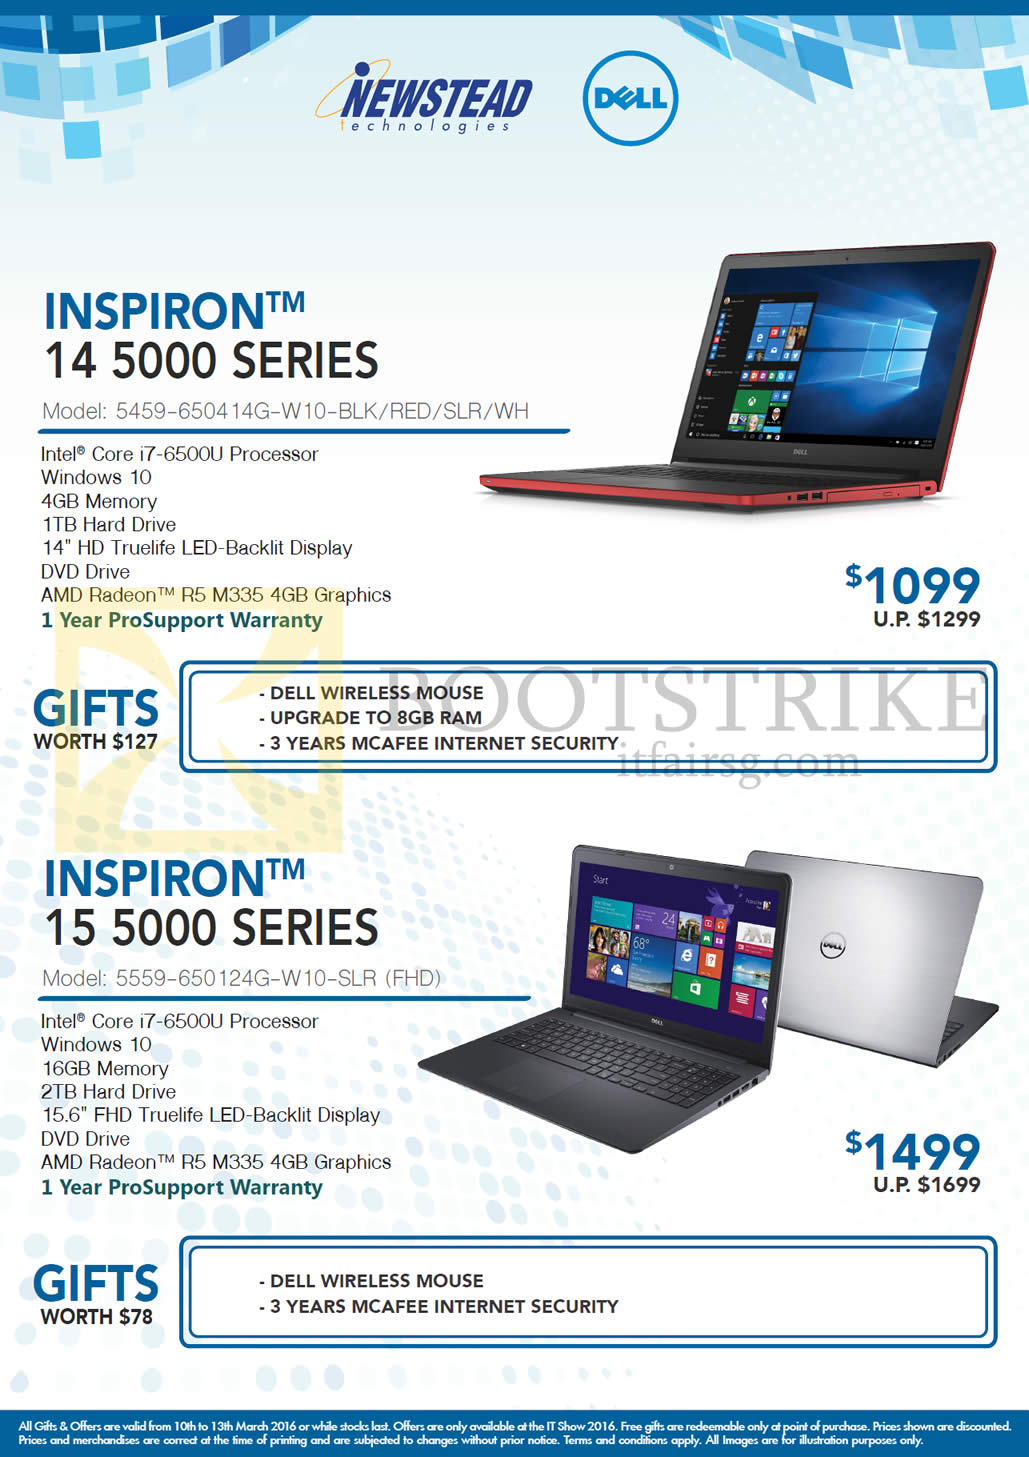 IT SHOW 2016 price list image brochure of Dell Newstead Notebooks Inspiron 14 5000, 15 5000 Series